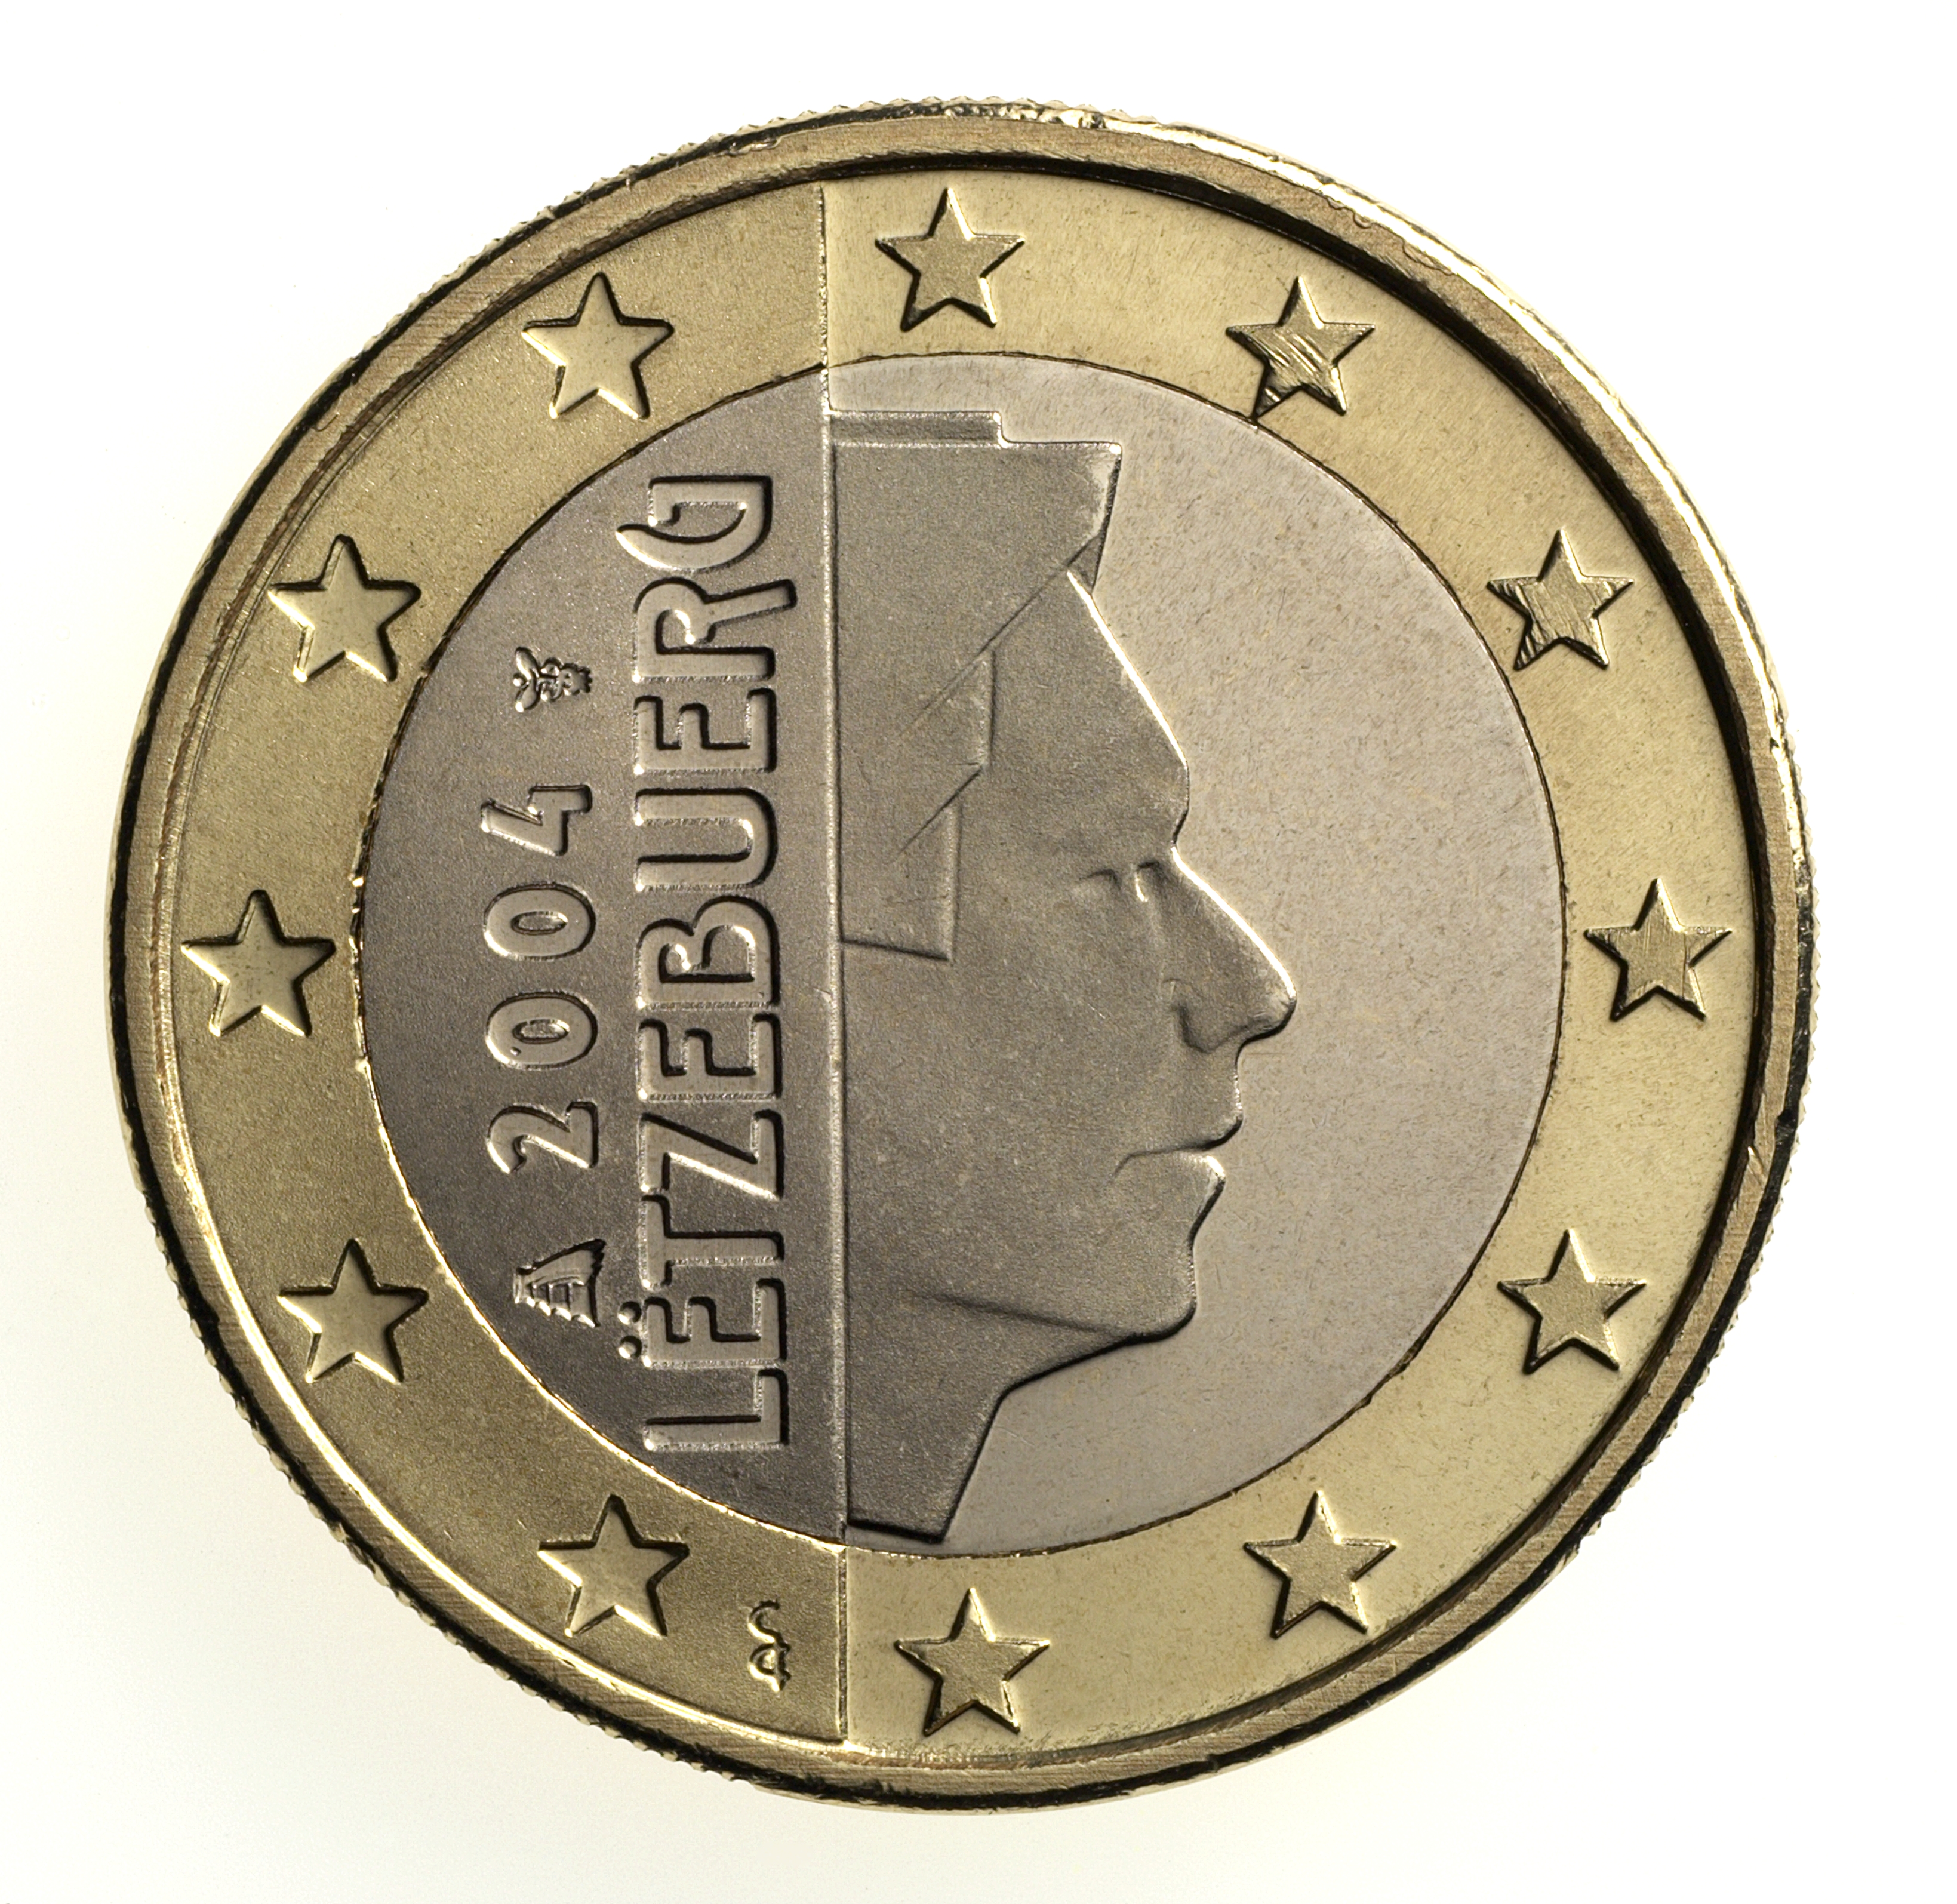 Banque centrale du Luxembourg - Luxembourg's euro coins